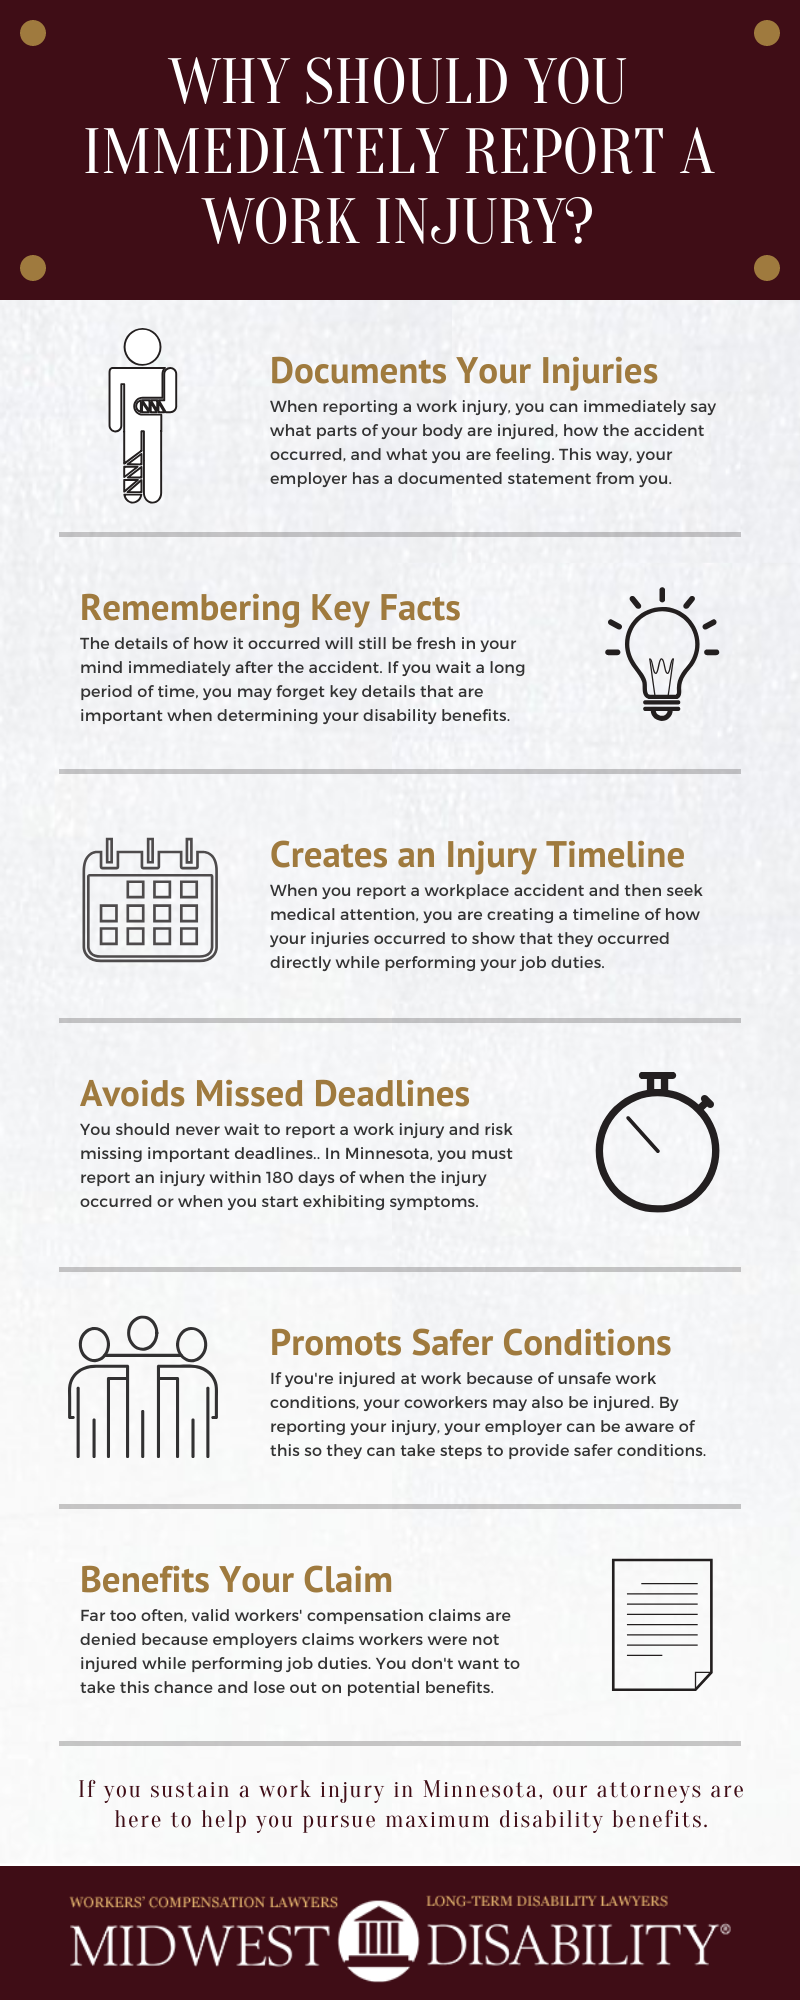 Infographic: Why should you immediately report a work injury? 1. Documents your injury. 2. Helps you remember key facts. 3. Creates an injury timeline. 4. Avoid missed deadlines. 5. Promotes safer conditions. 6. Strengthens your workers comp claim.